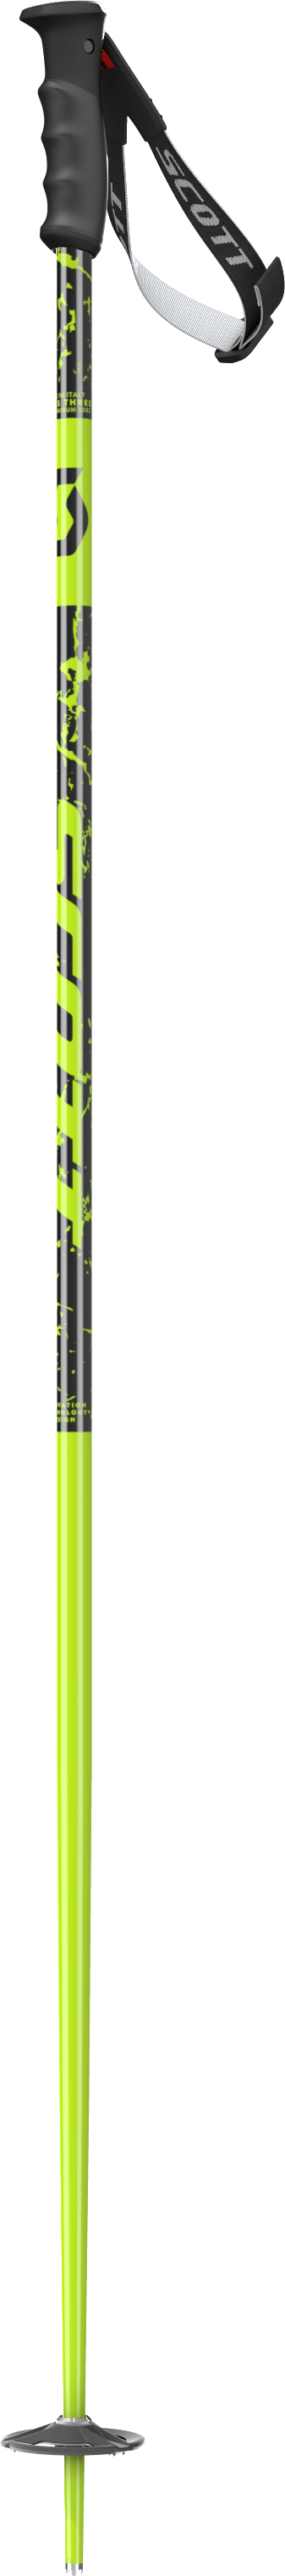 Pure SRS Pole Fluo Yellow